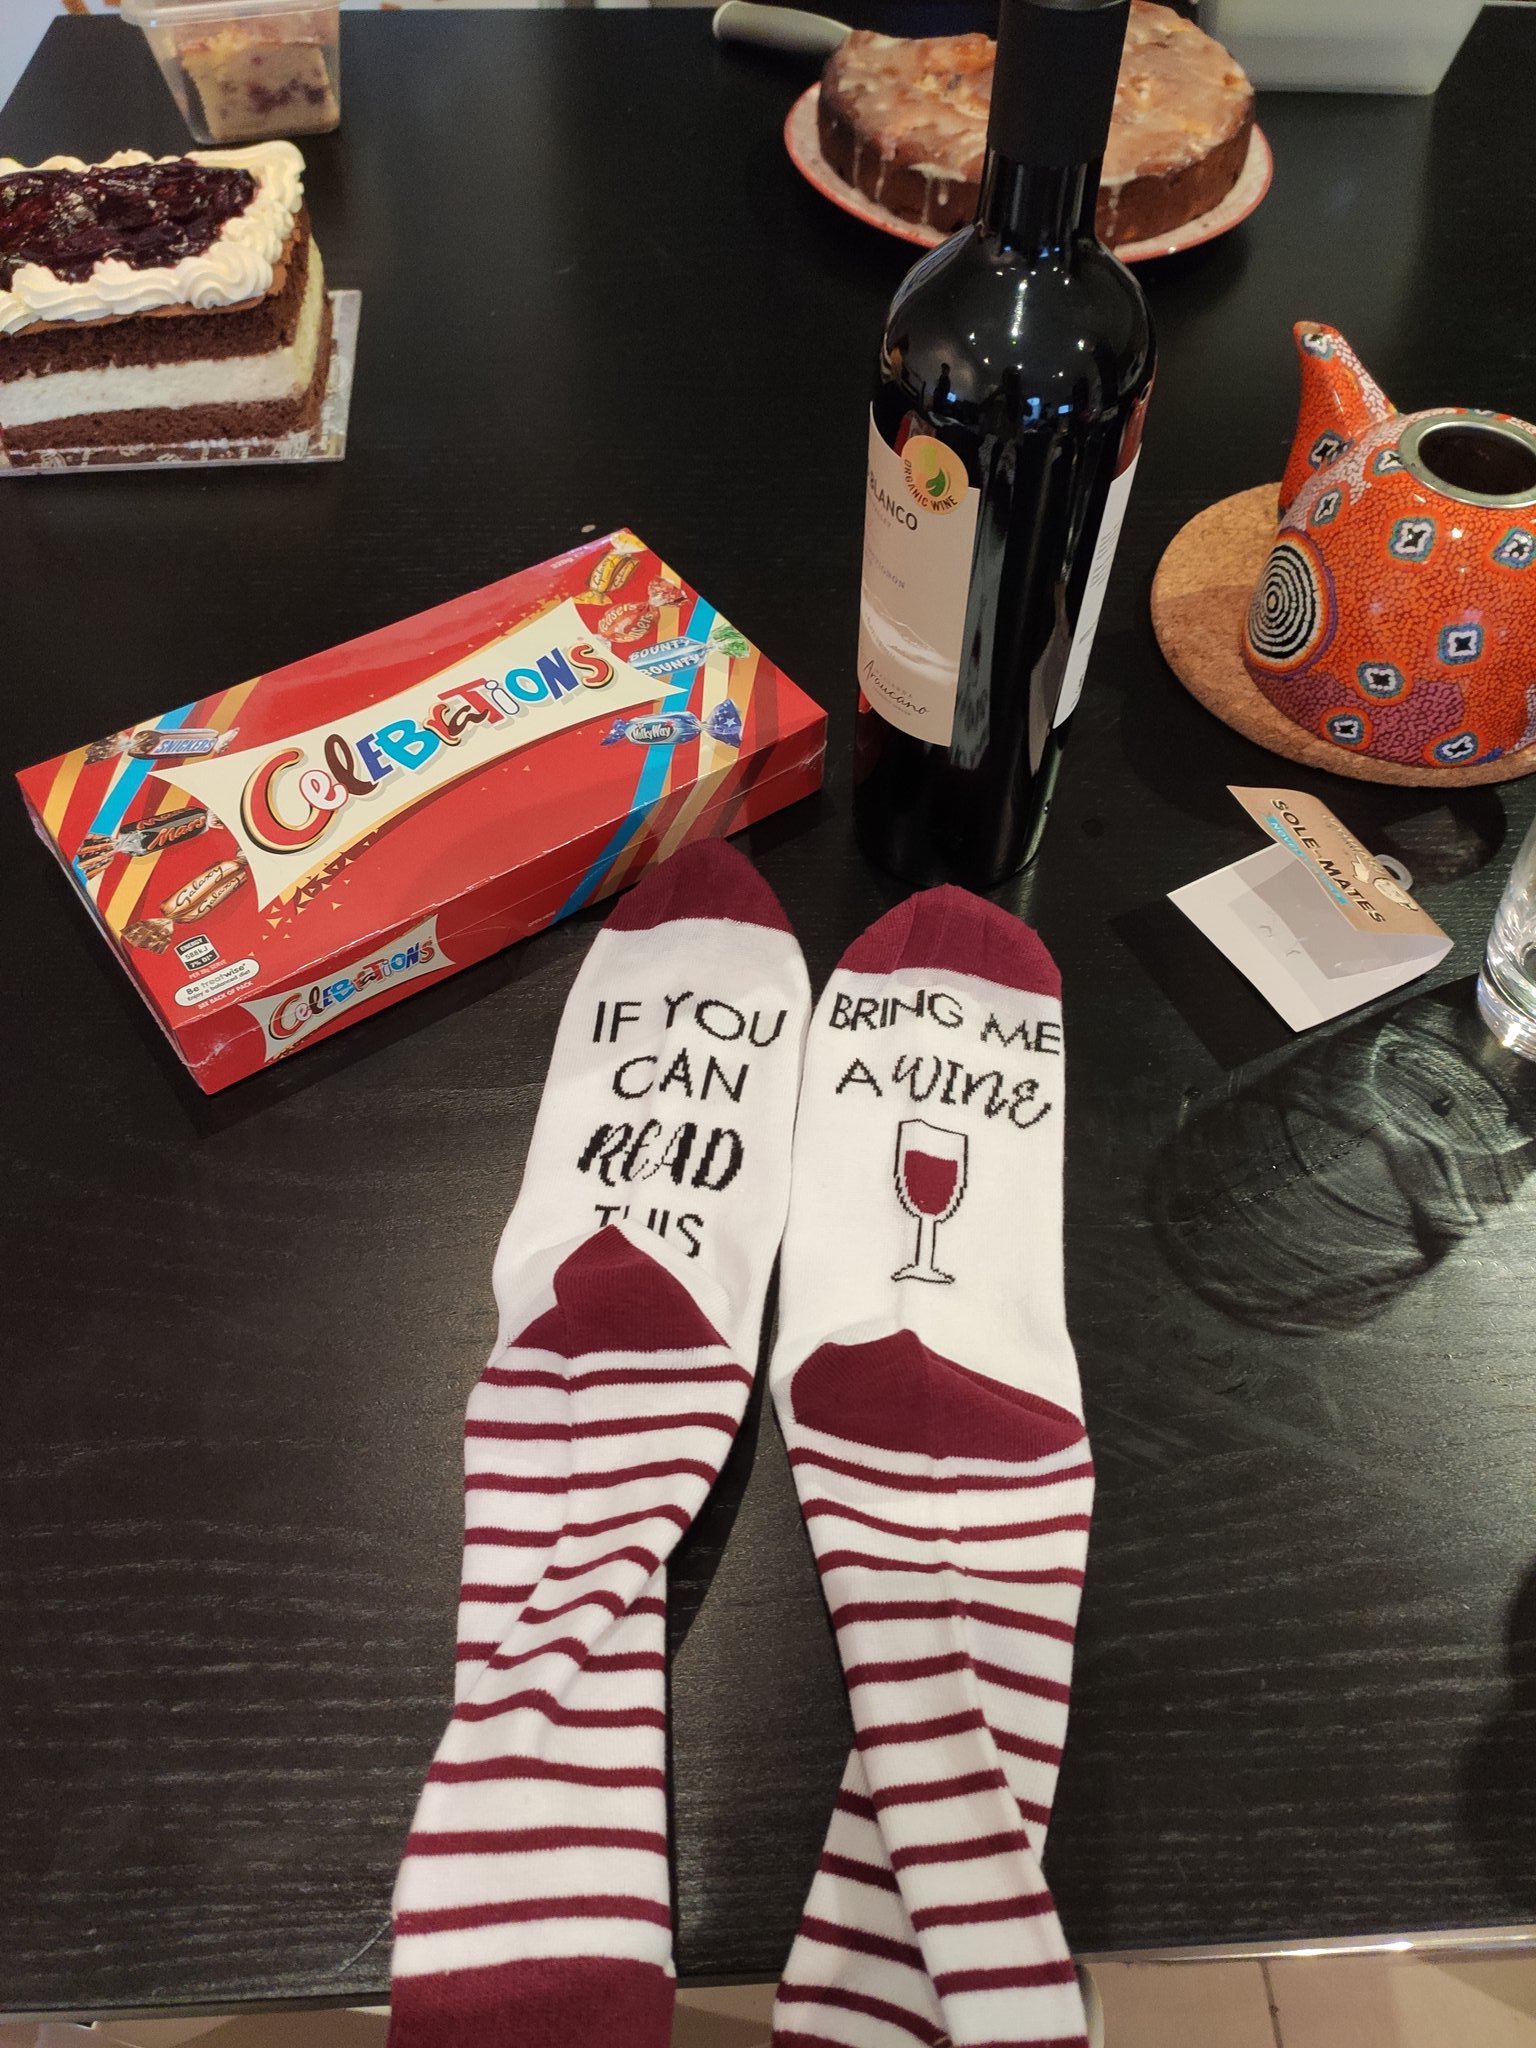 If You Can Read This, Bring Me Cake Socks — Lavley